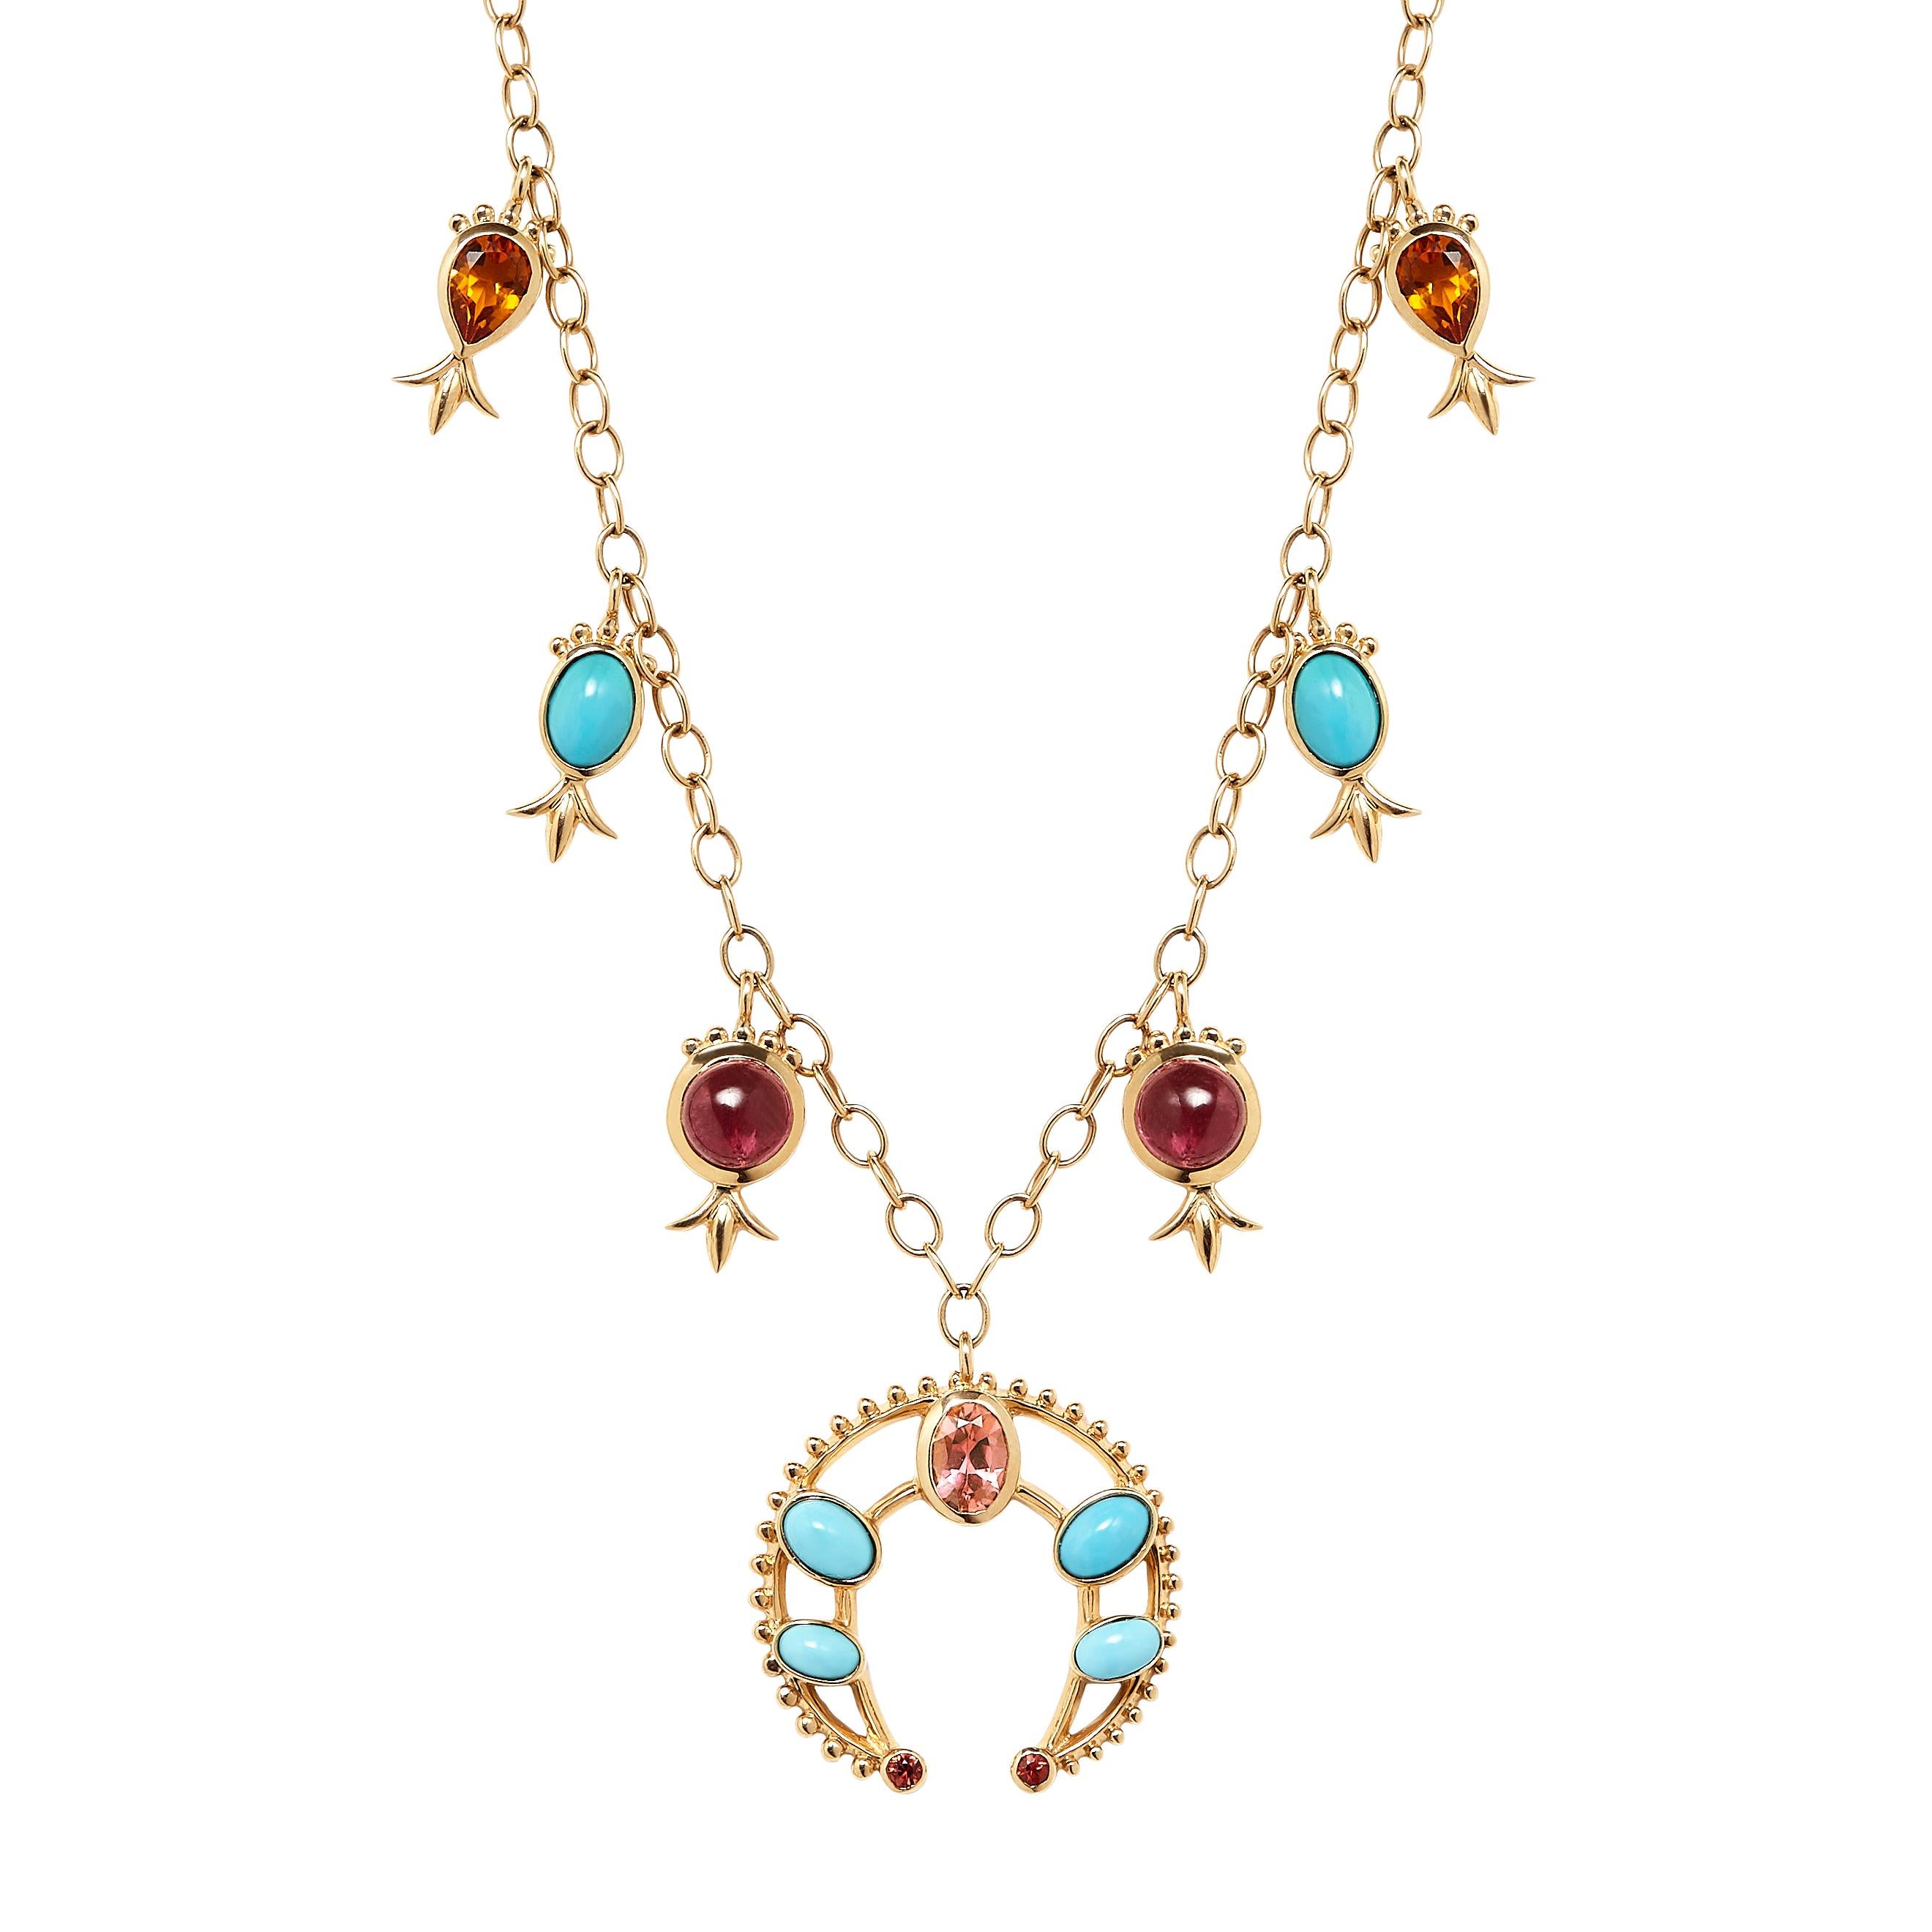 This Marlo Laz 14 Karat yellow gold turquoise, pink tourmaline, orange sapphire and orange citrin squash blossom necklace is inspired by the southwest and an ode to Native American Navajo jewelry. Our iconic pink-orange Marlo Laz color palette goes